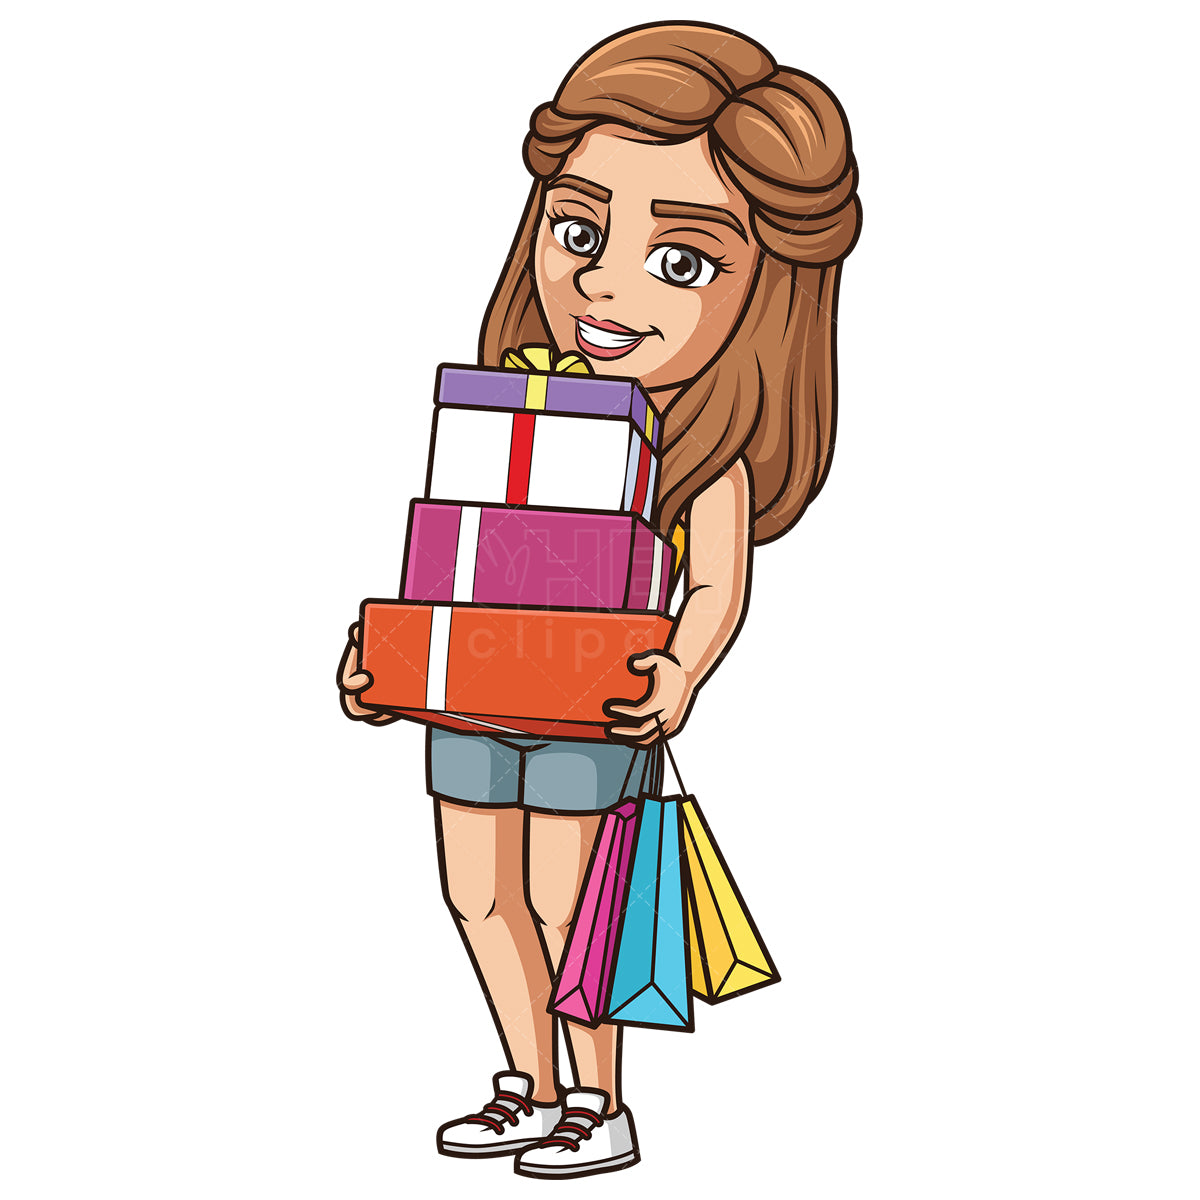 Royalty-free stock vector illustration of a young woman shopping gifts.